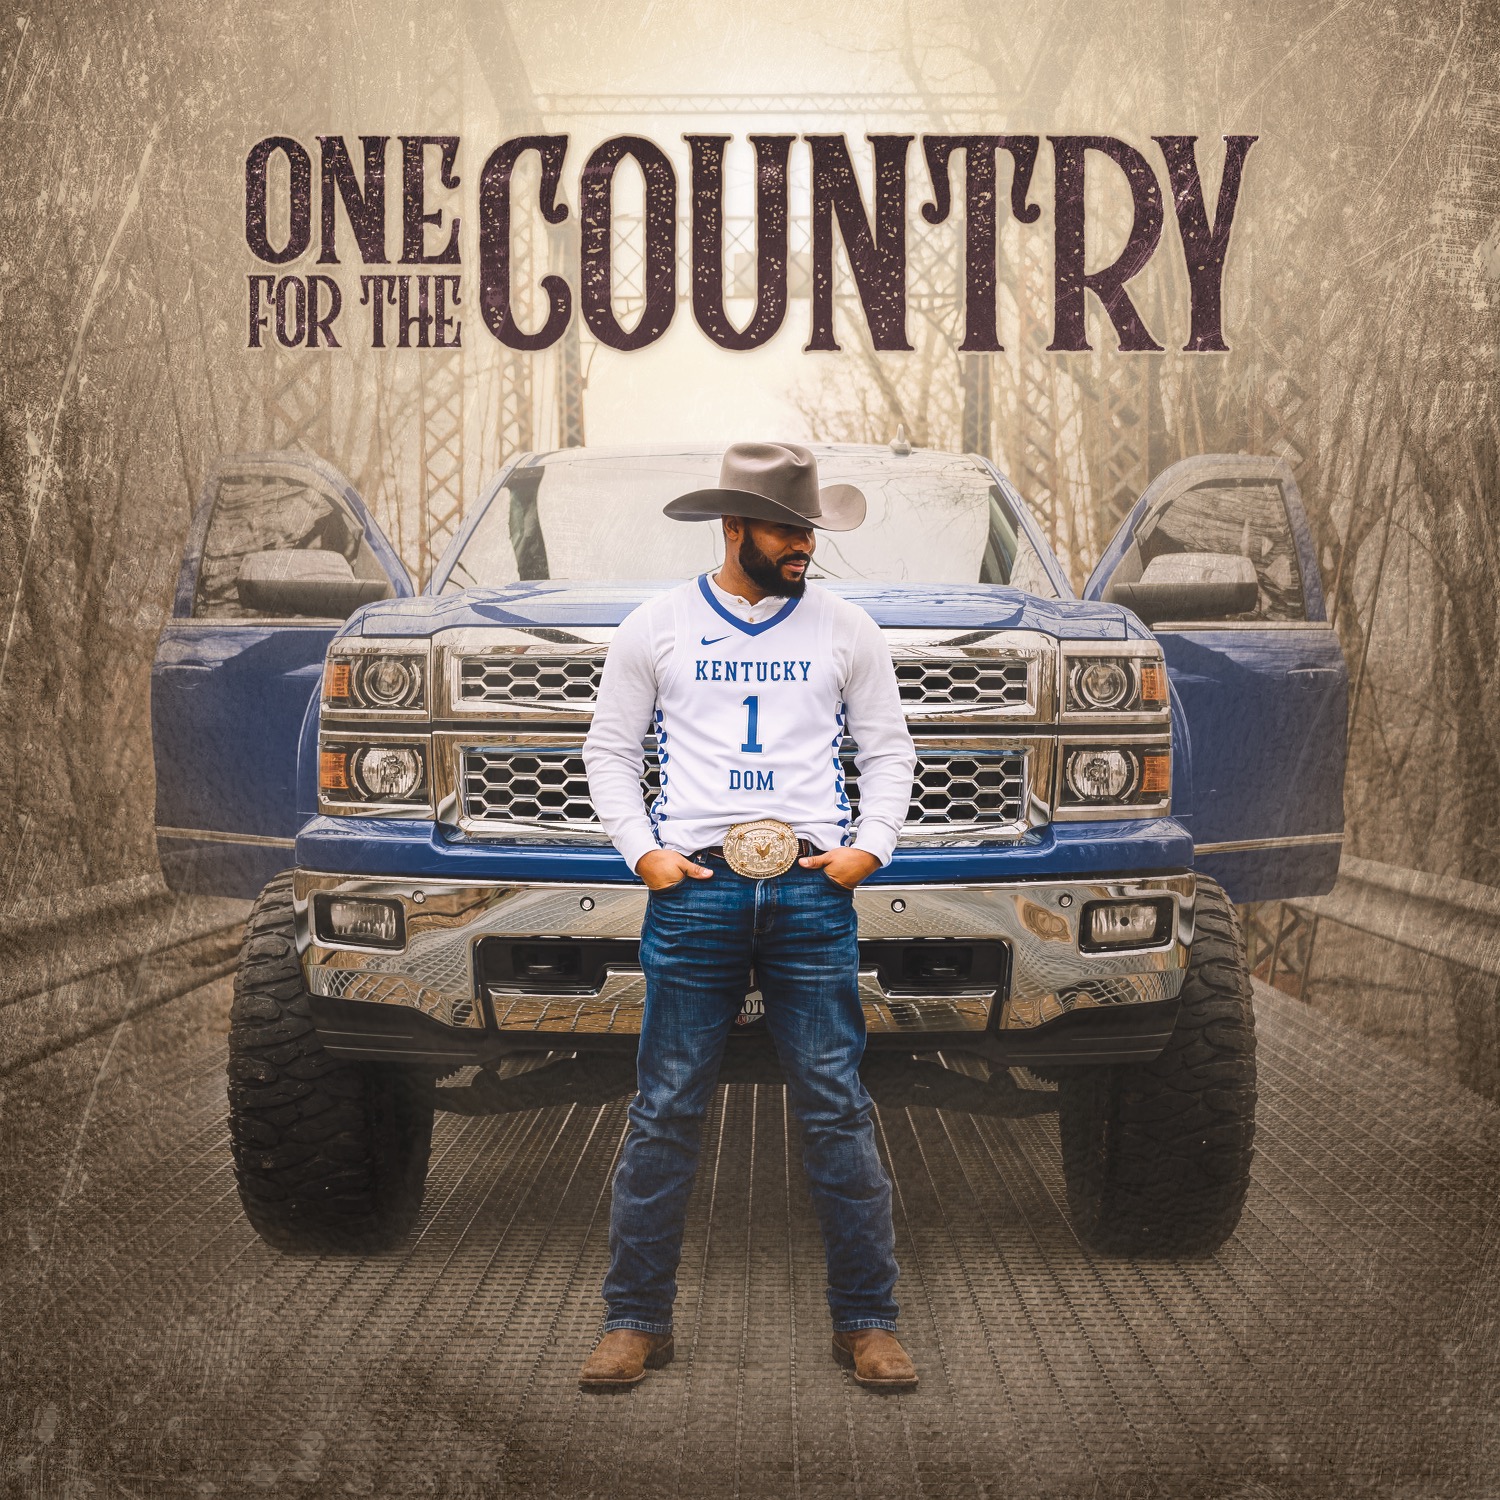 [Video] Kentucky Dom ‘One For the Country” | @kentucky_dom